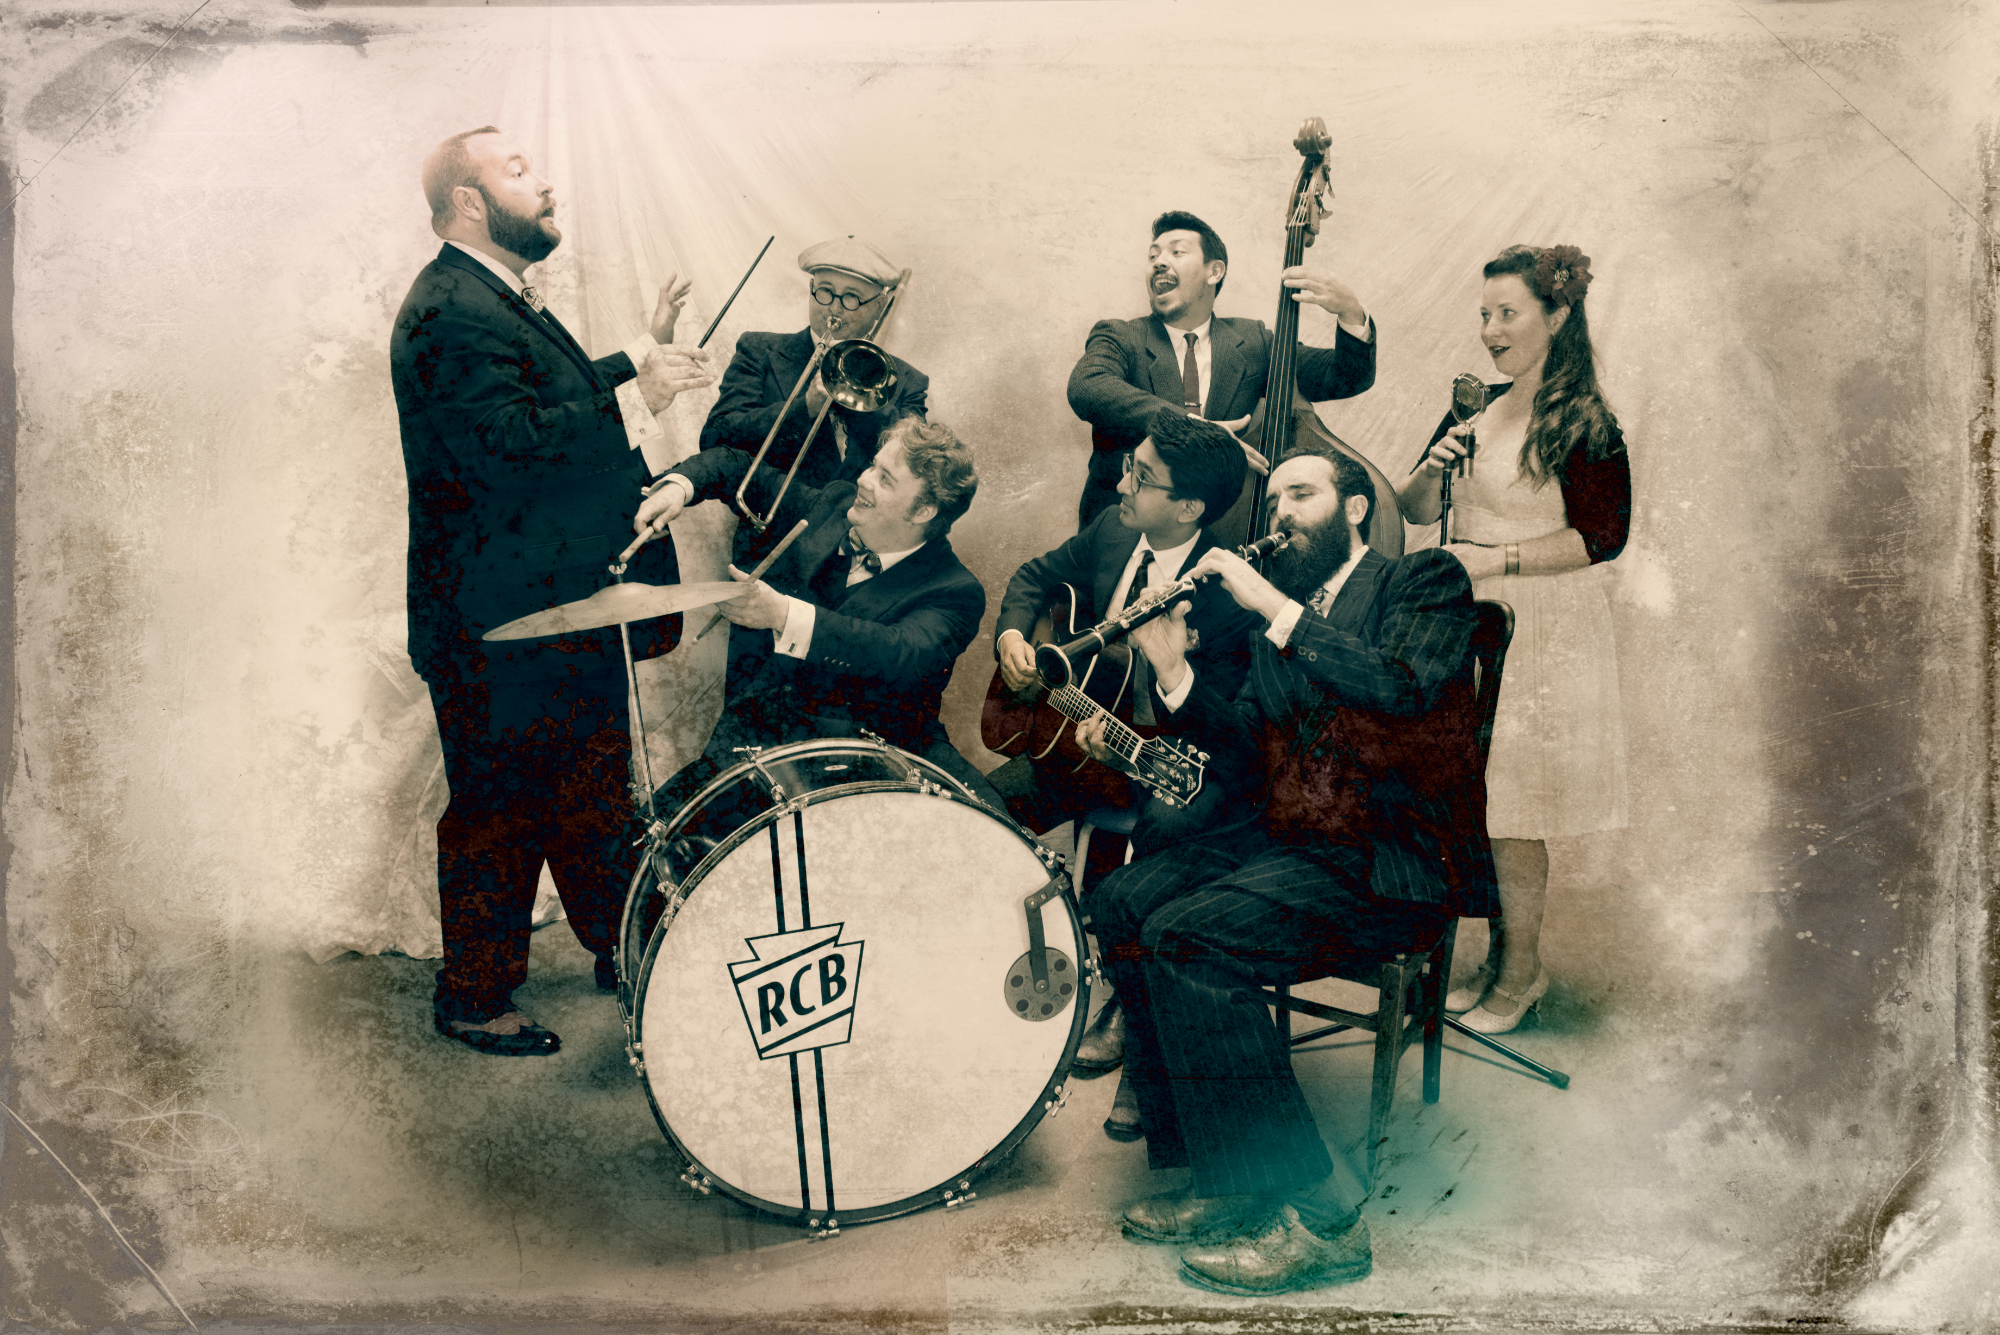 Seven musicians playing their instruments in a vintage-looking photograph.